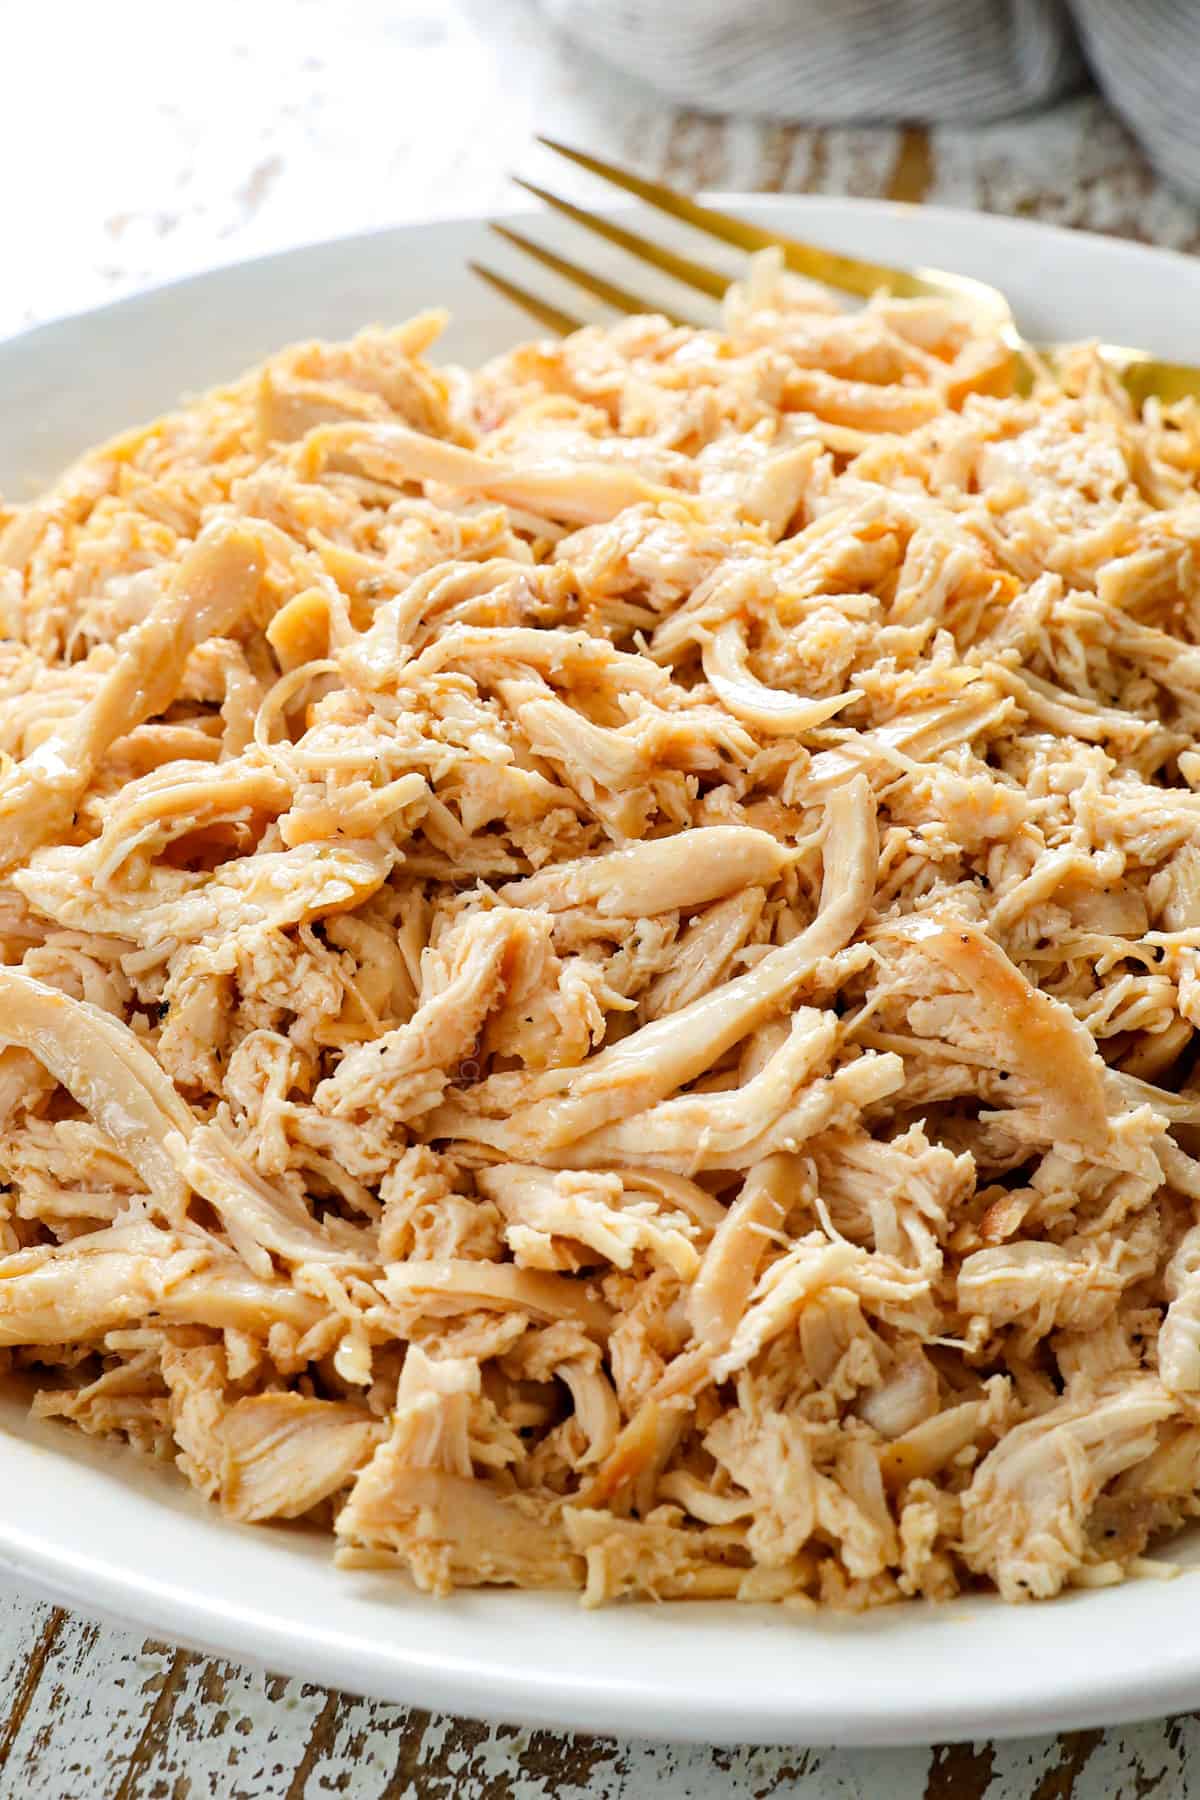 up close of shredded chicken recipe showing how tender and juicy it is